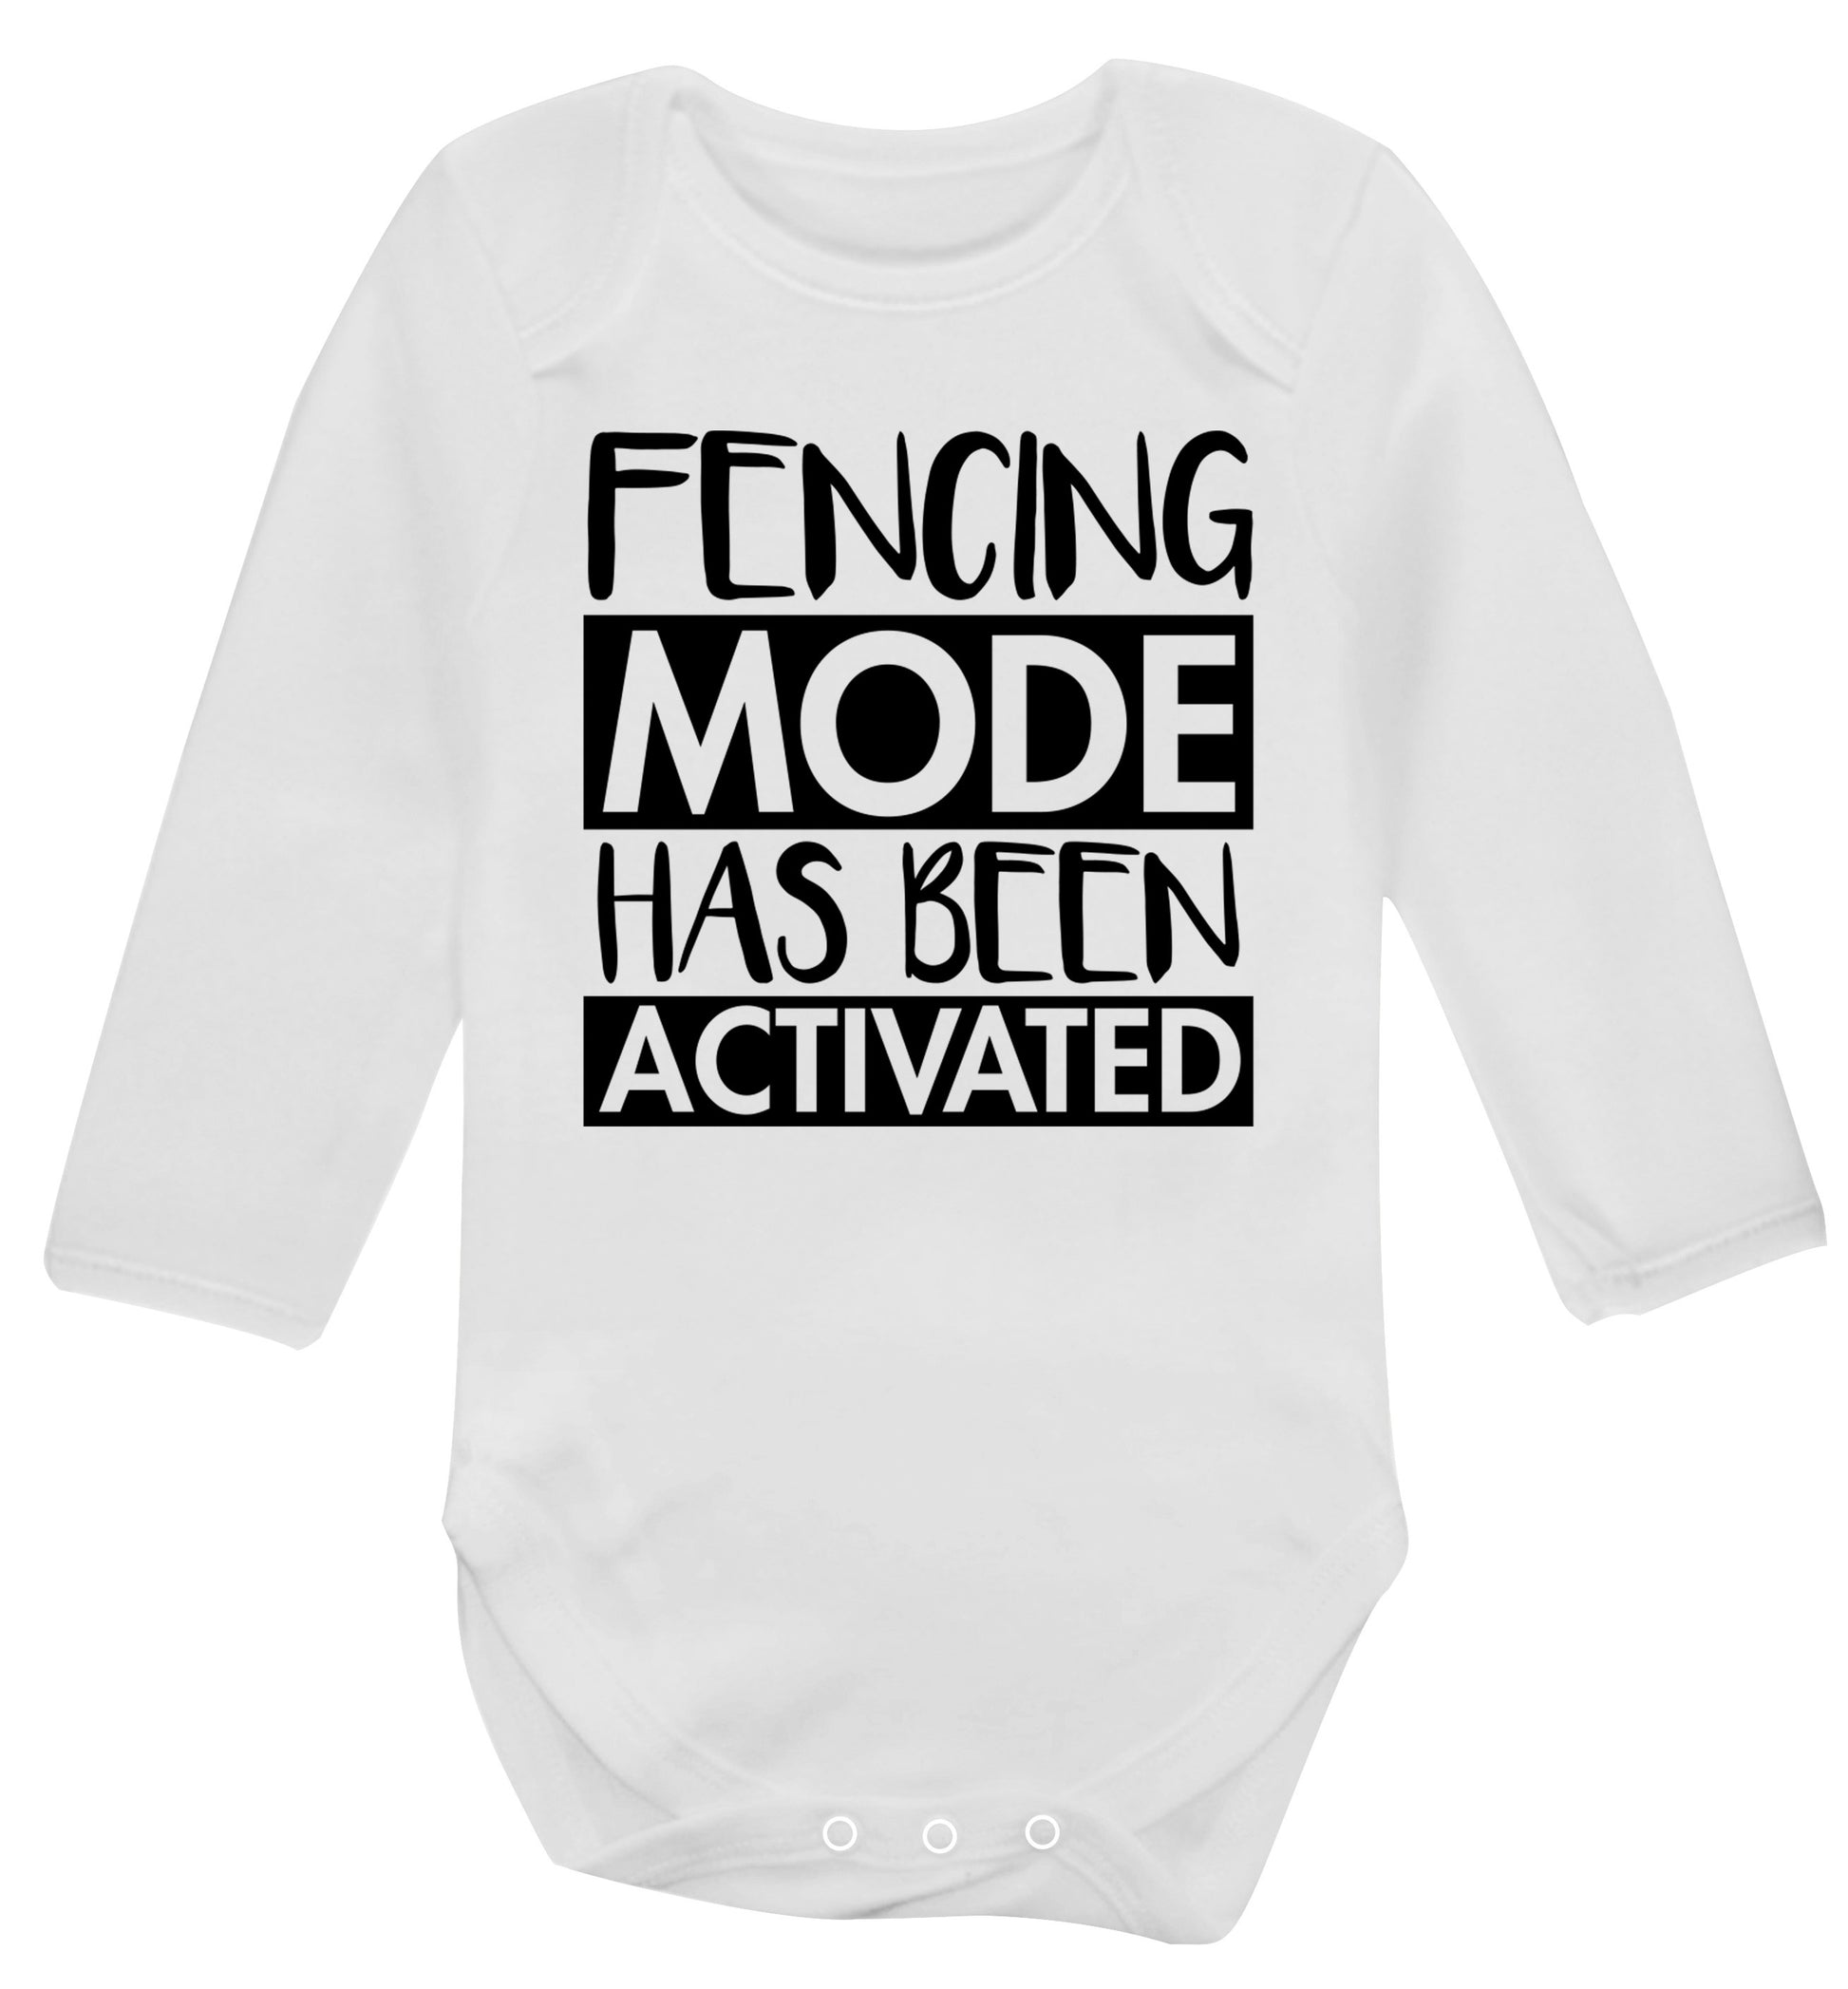 Fencing mode activated Baby Vest long sleeved white 6-12 months